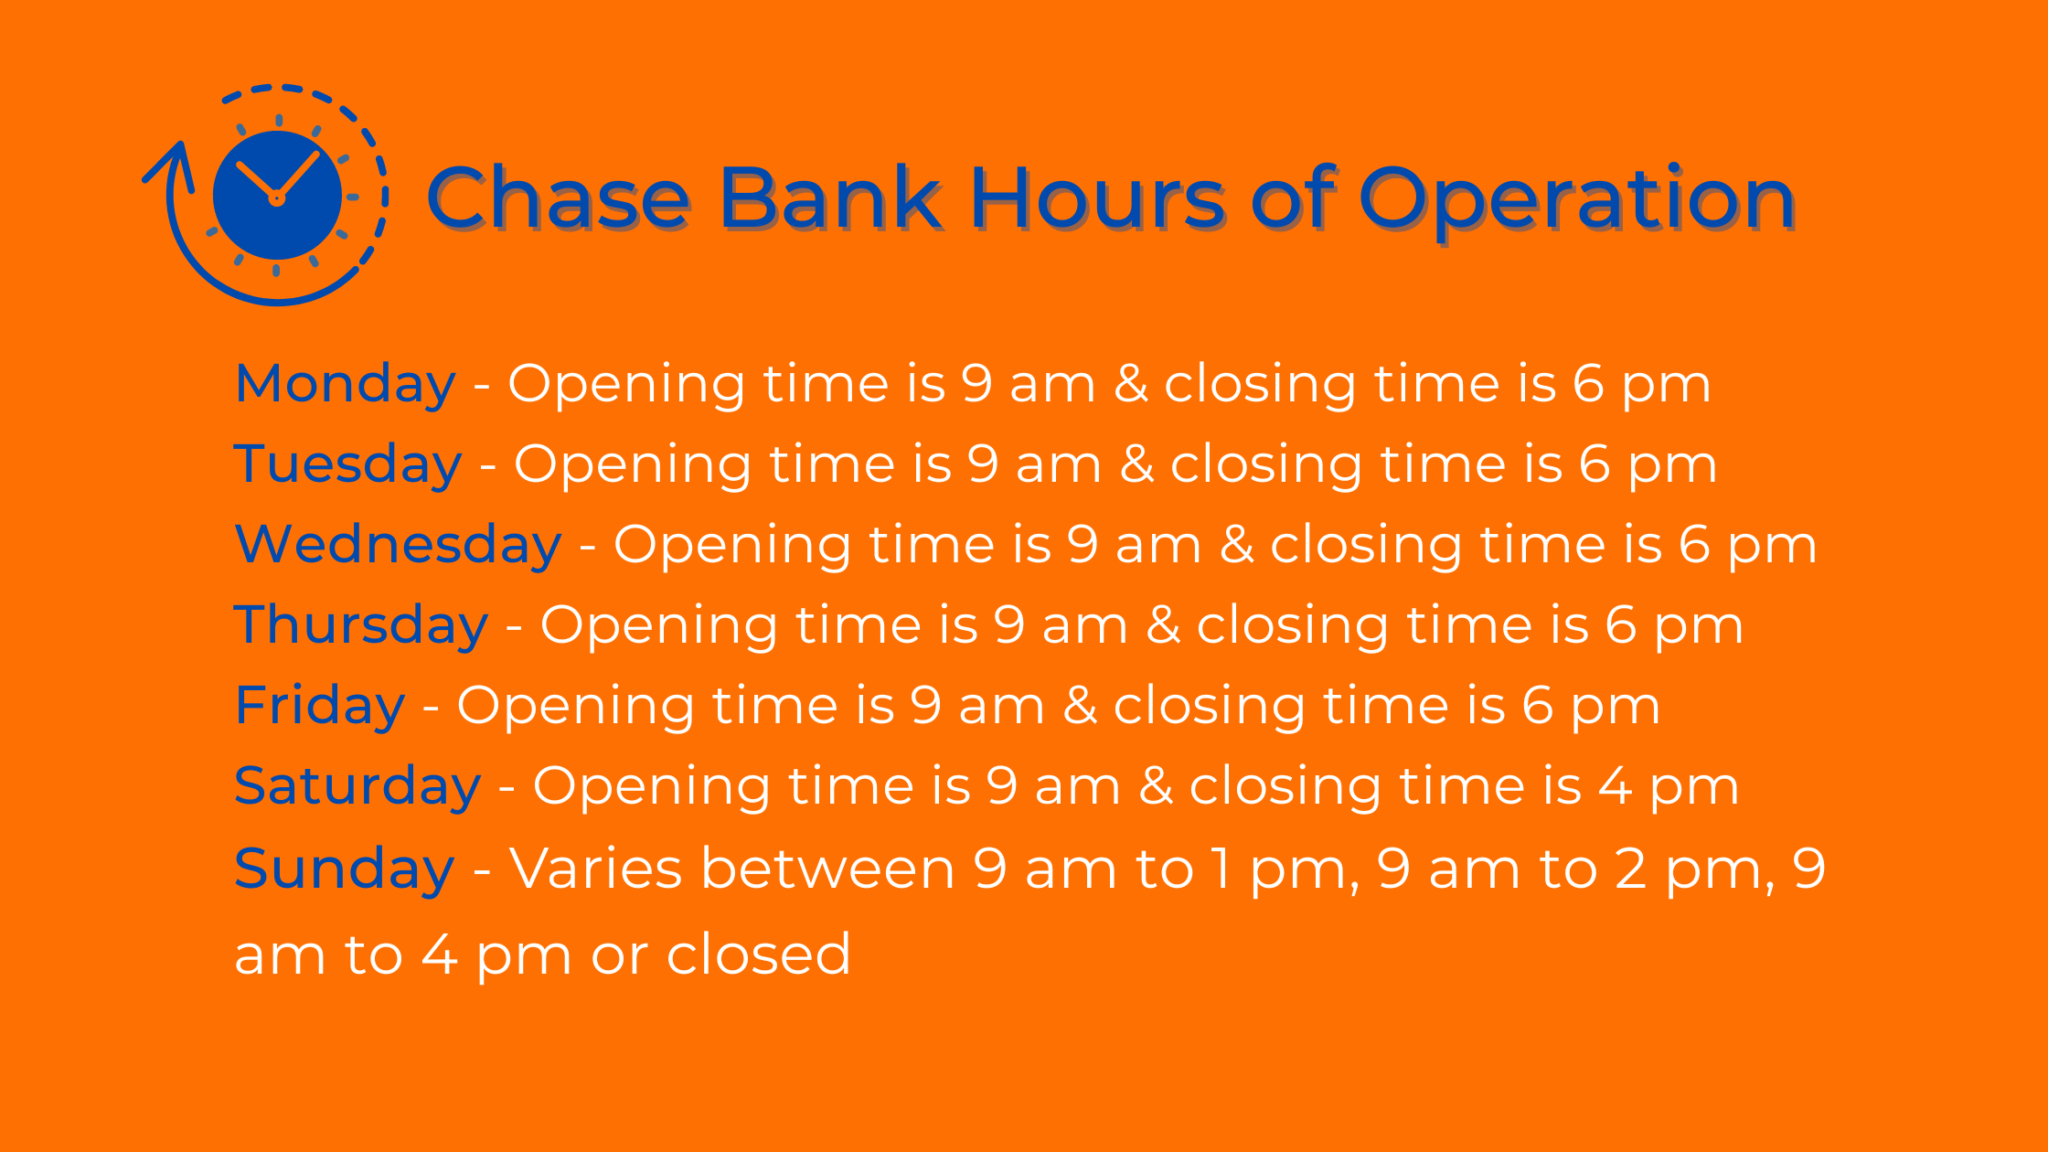 Chase Bank Hours of Operation (Days, Times & Holiday Hours)